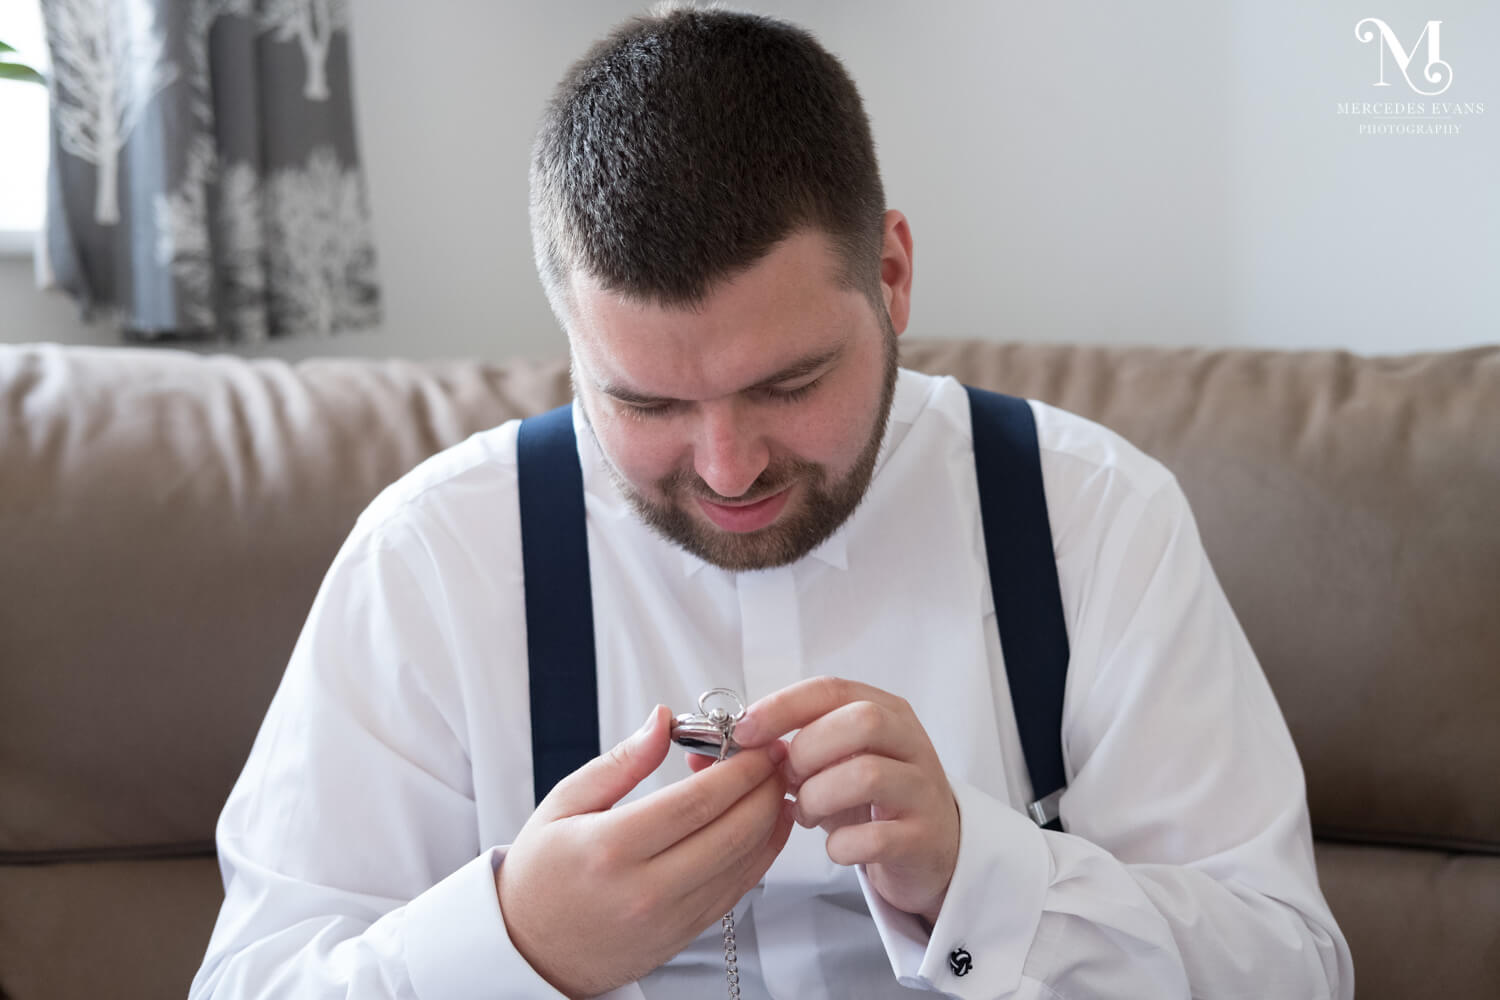 The groom looks at his pocket watch as he sits on the sofa on the morning of his wedding